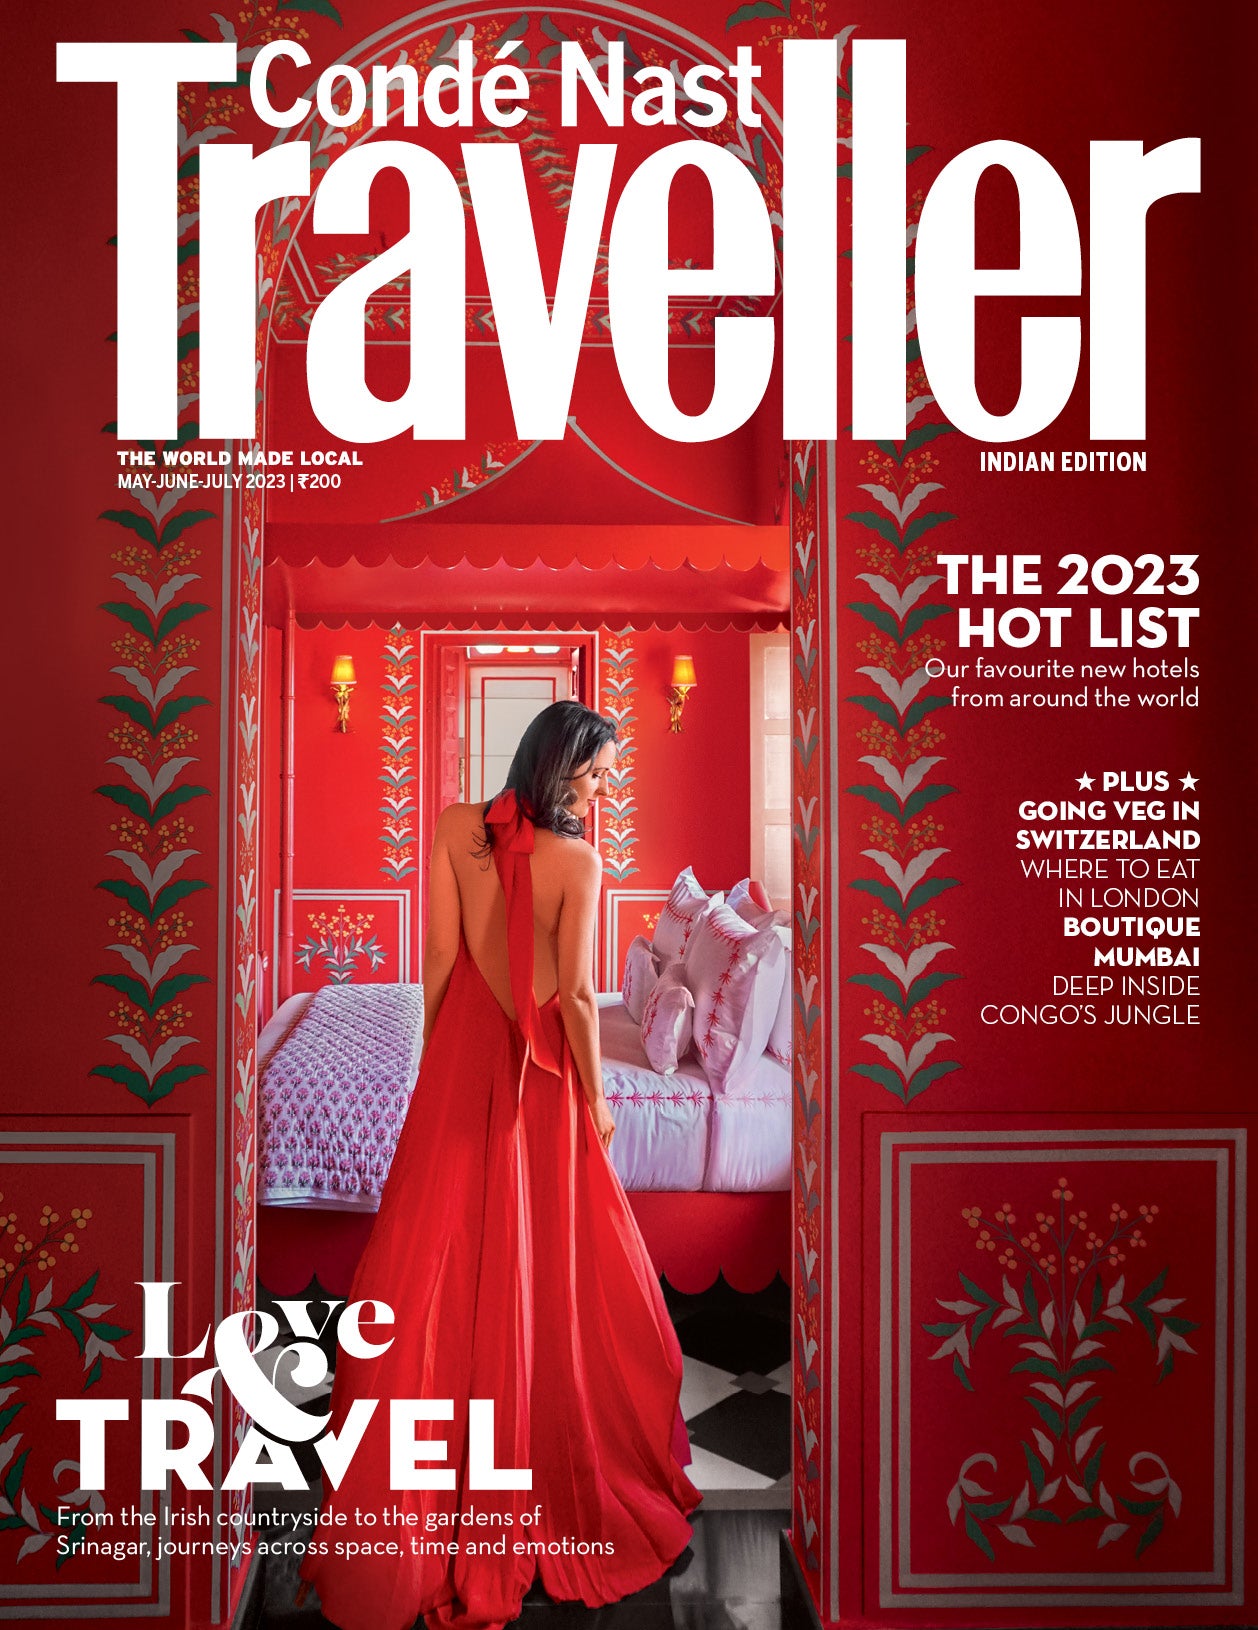 Rosanna Falconer on the cover of Conde Nast Traveller 2023